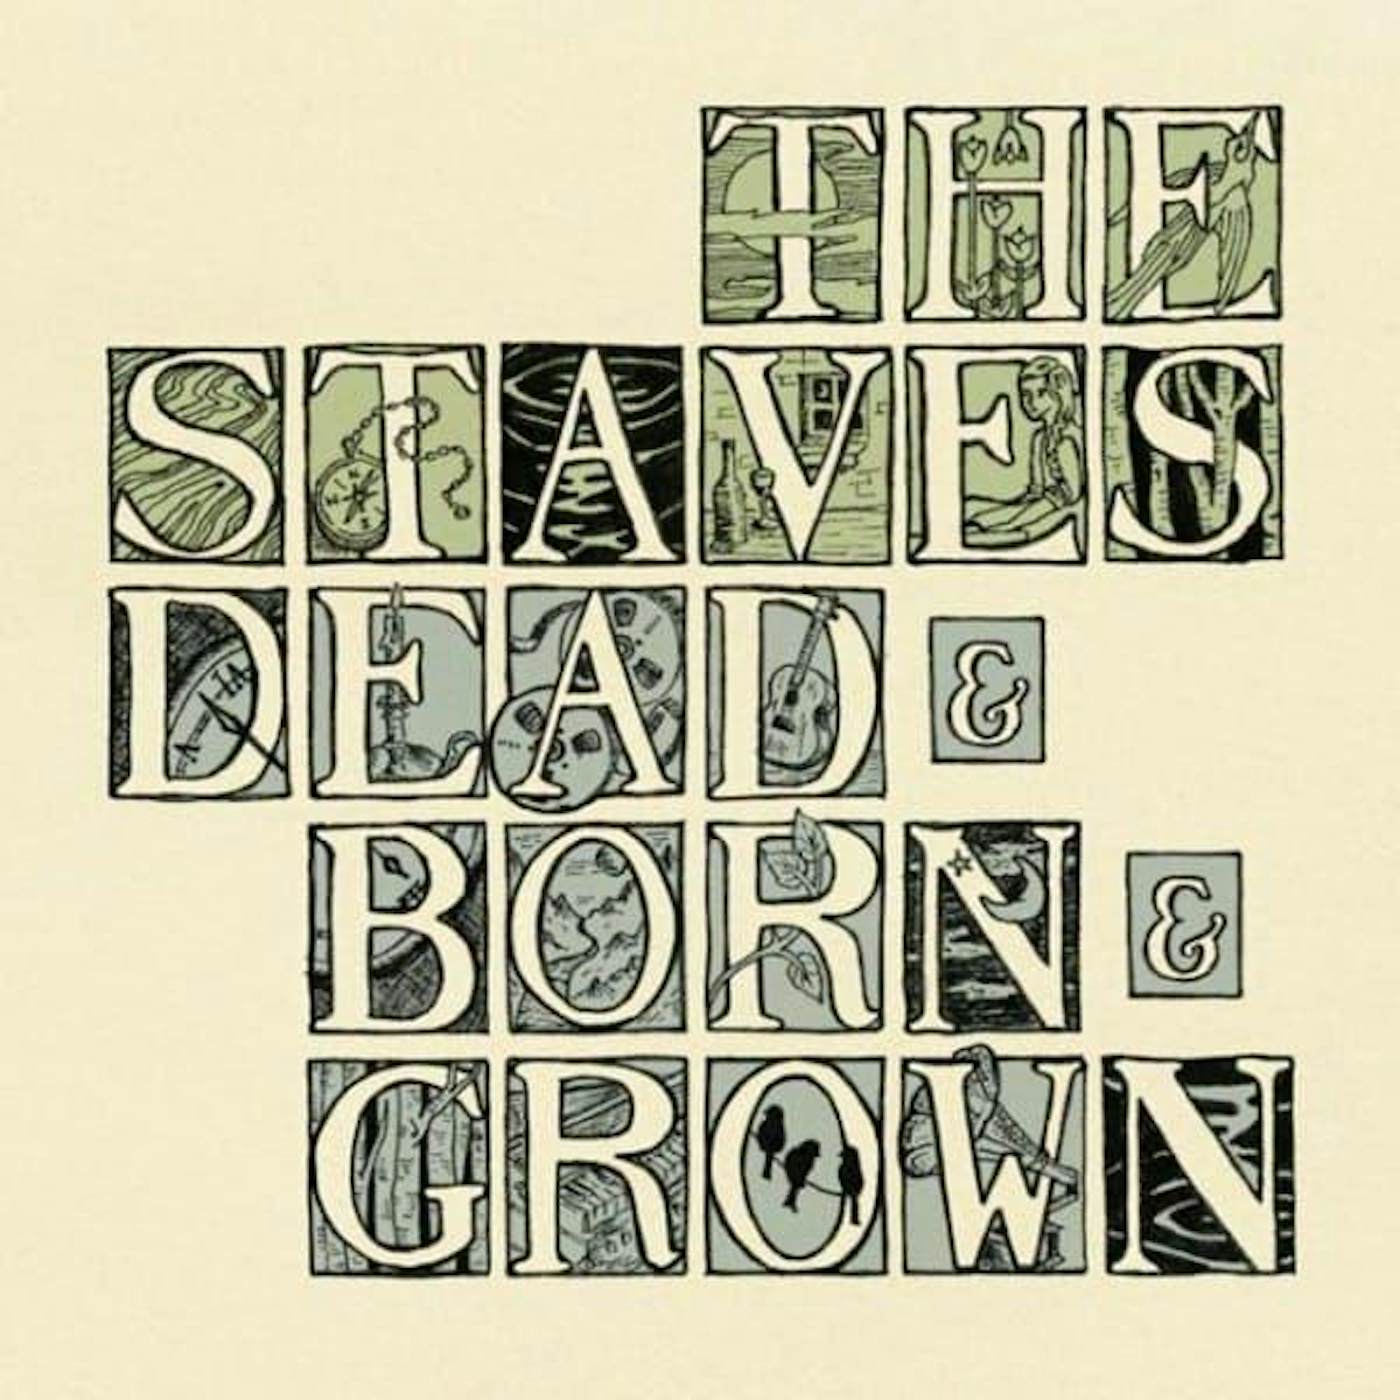 The Staves Dead & Born & Grown: 10th Anniversary Vinyl Record